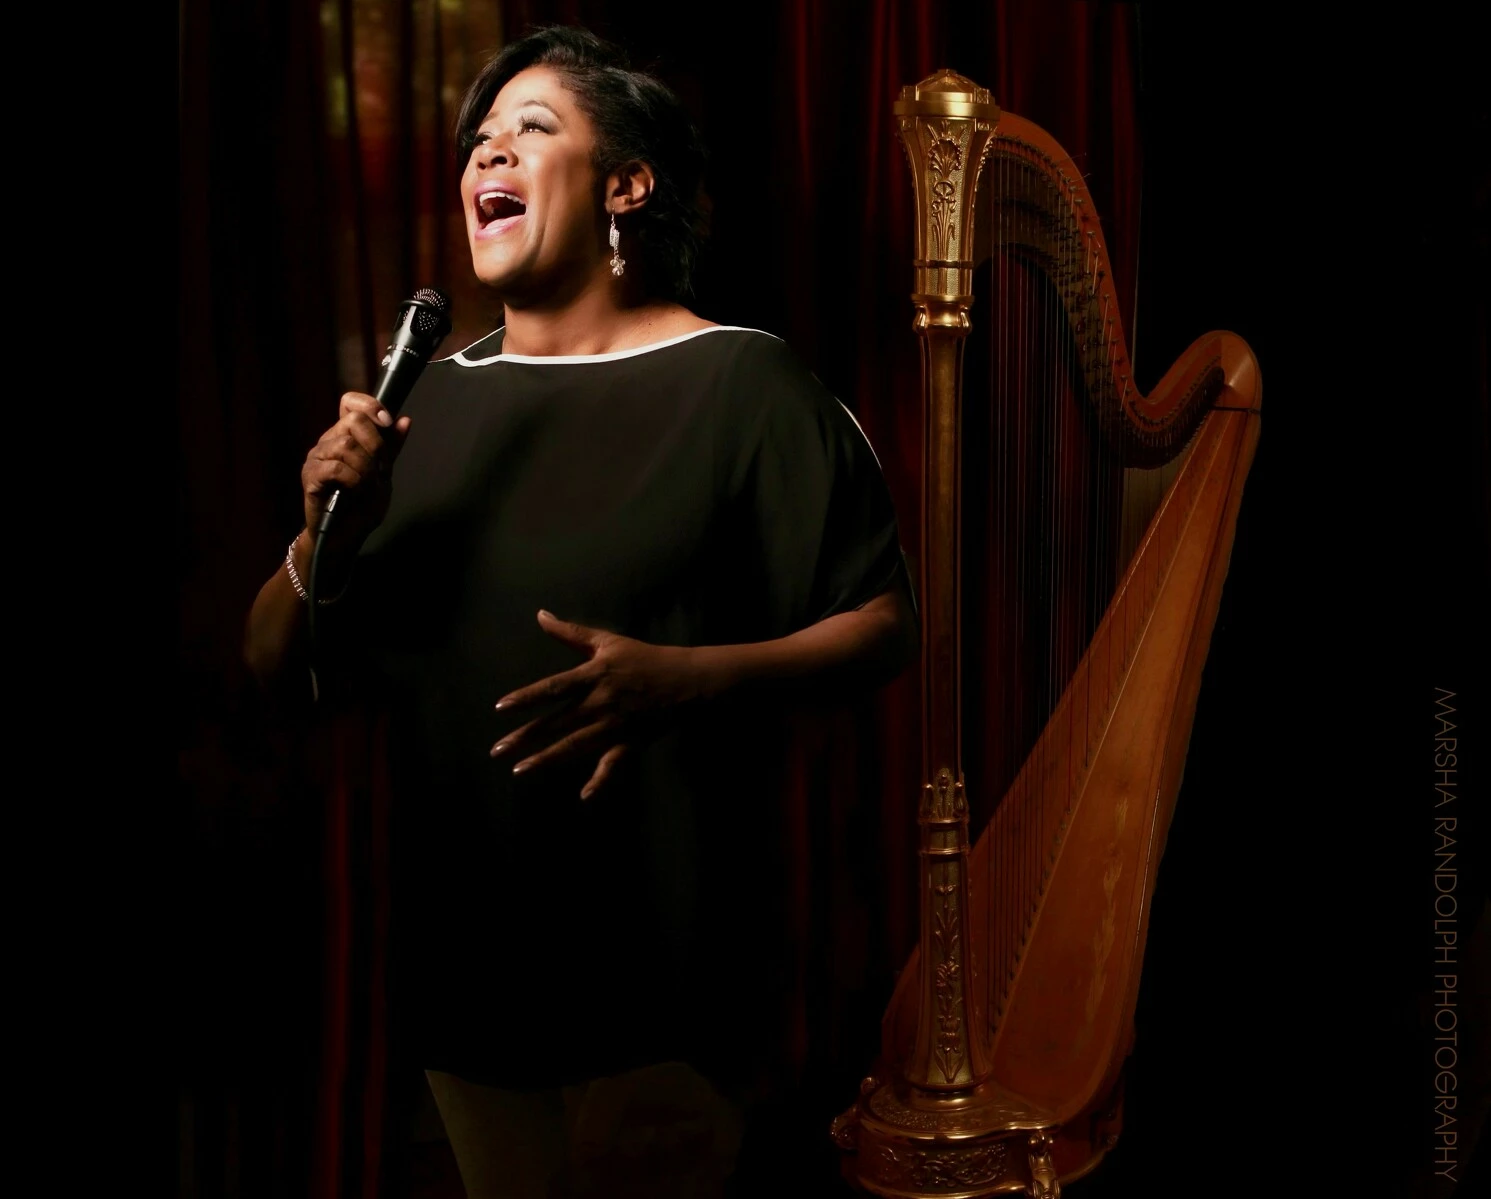 A woman sings into a microphone in front of a harp.